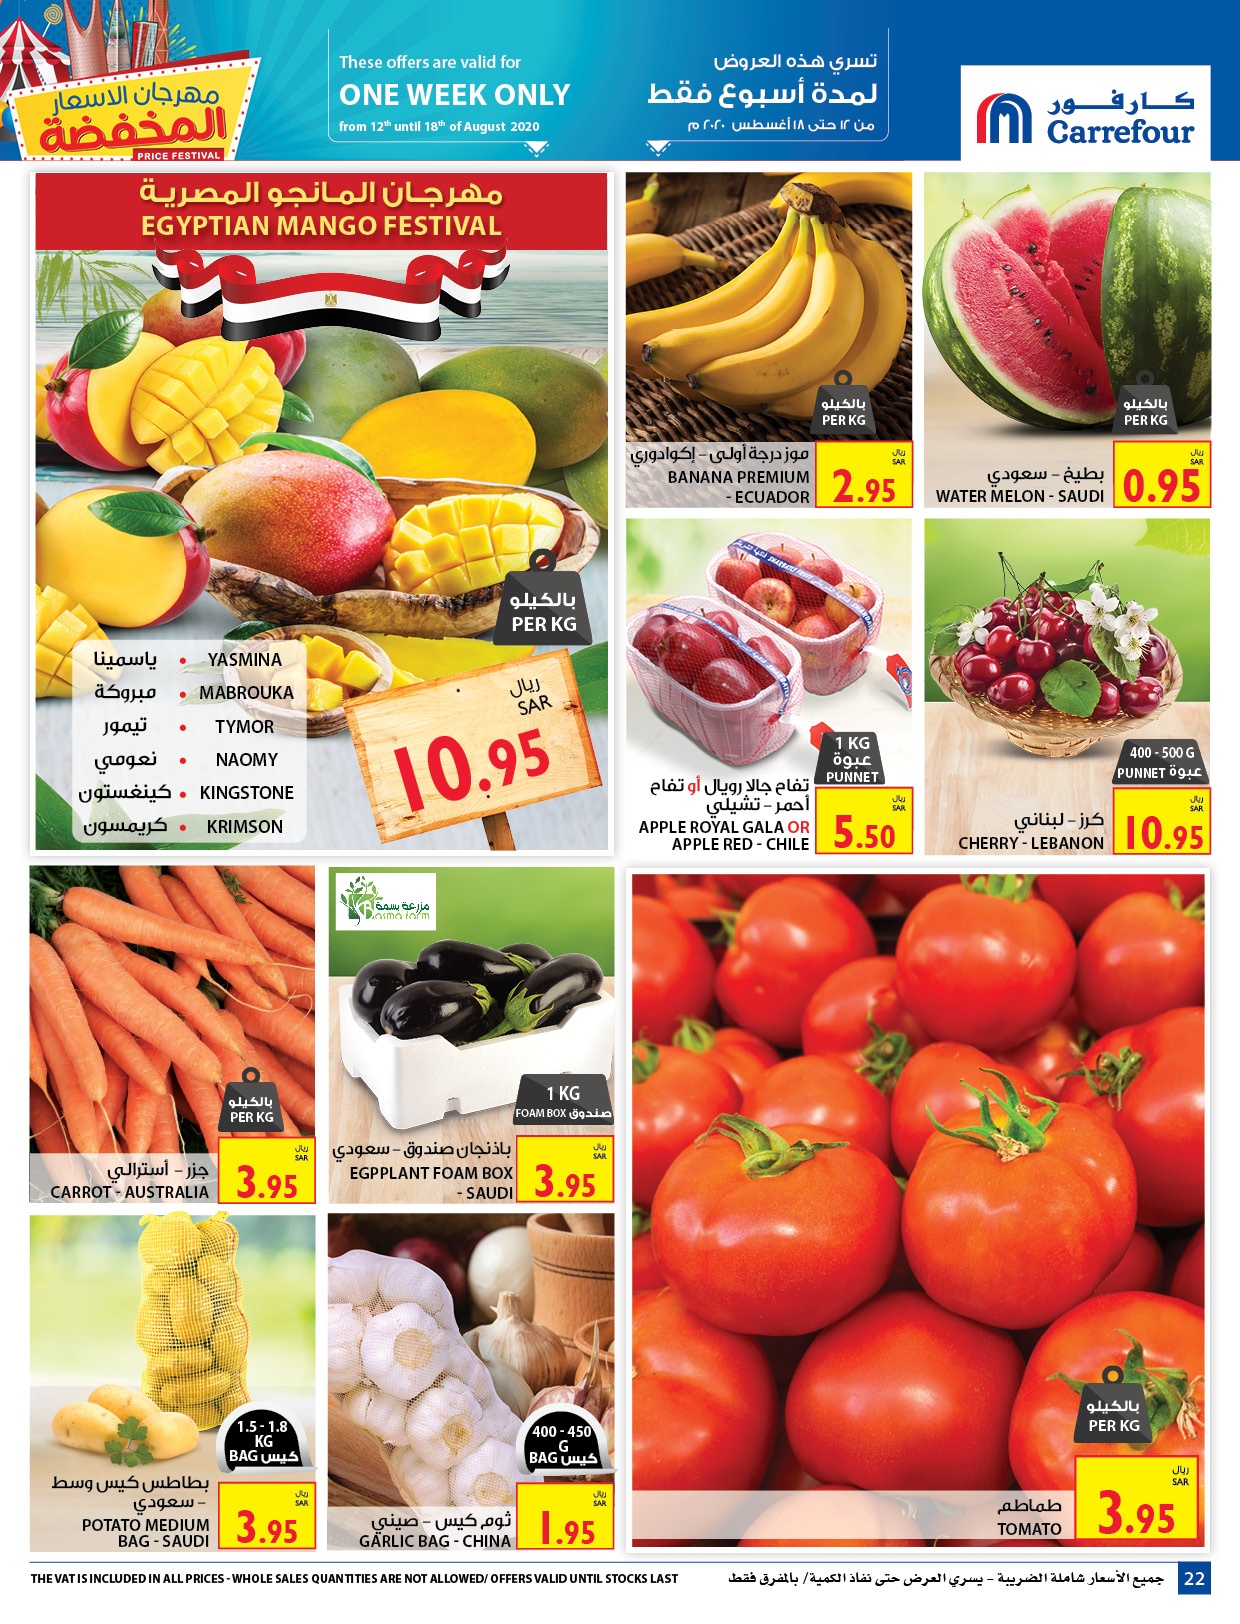 Carrefour Festival Offers from 12/8 till 25/8 | Carrefour KSA 23